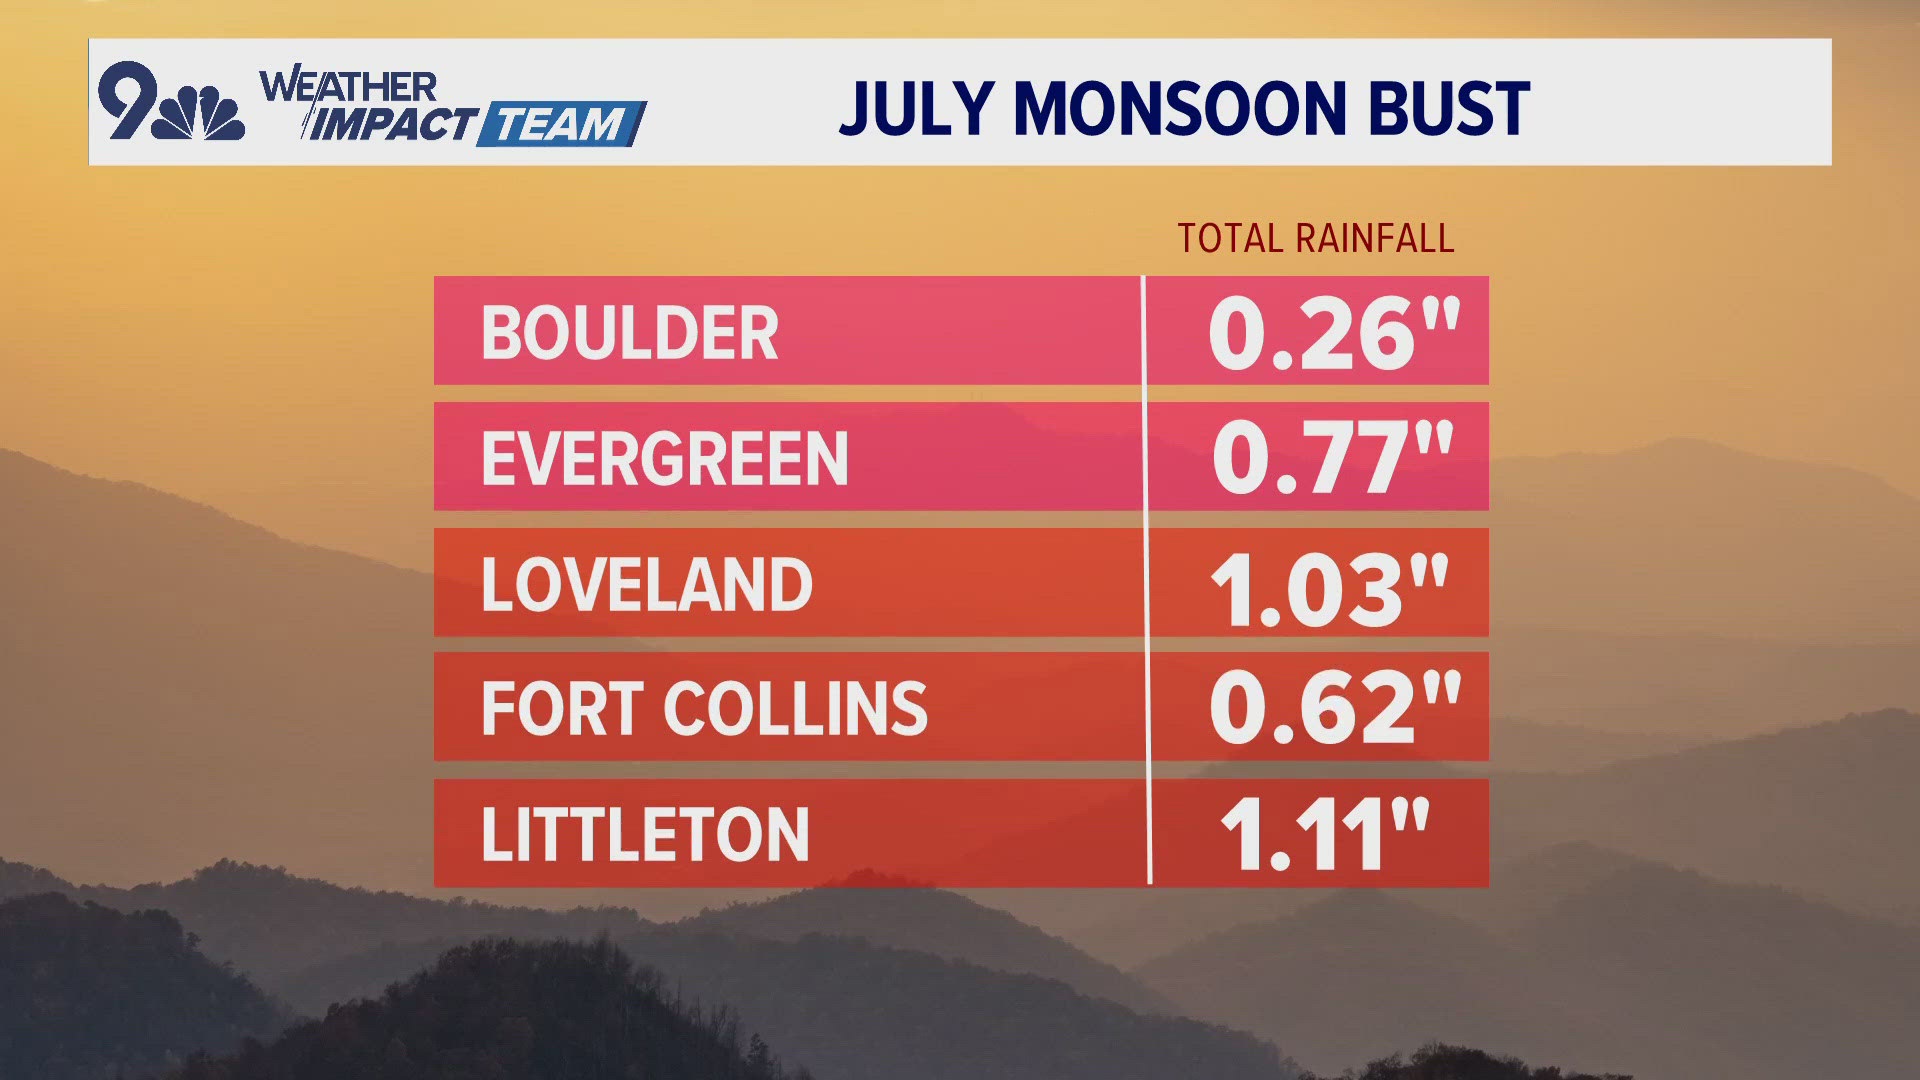 Usually by the start of July, Colorado starts to rely on the summer monsoon for rain and cloud cover. This year, that just hasn't happened yet for much of the state.